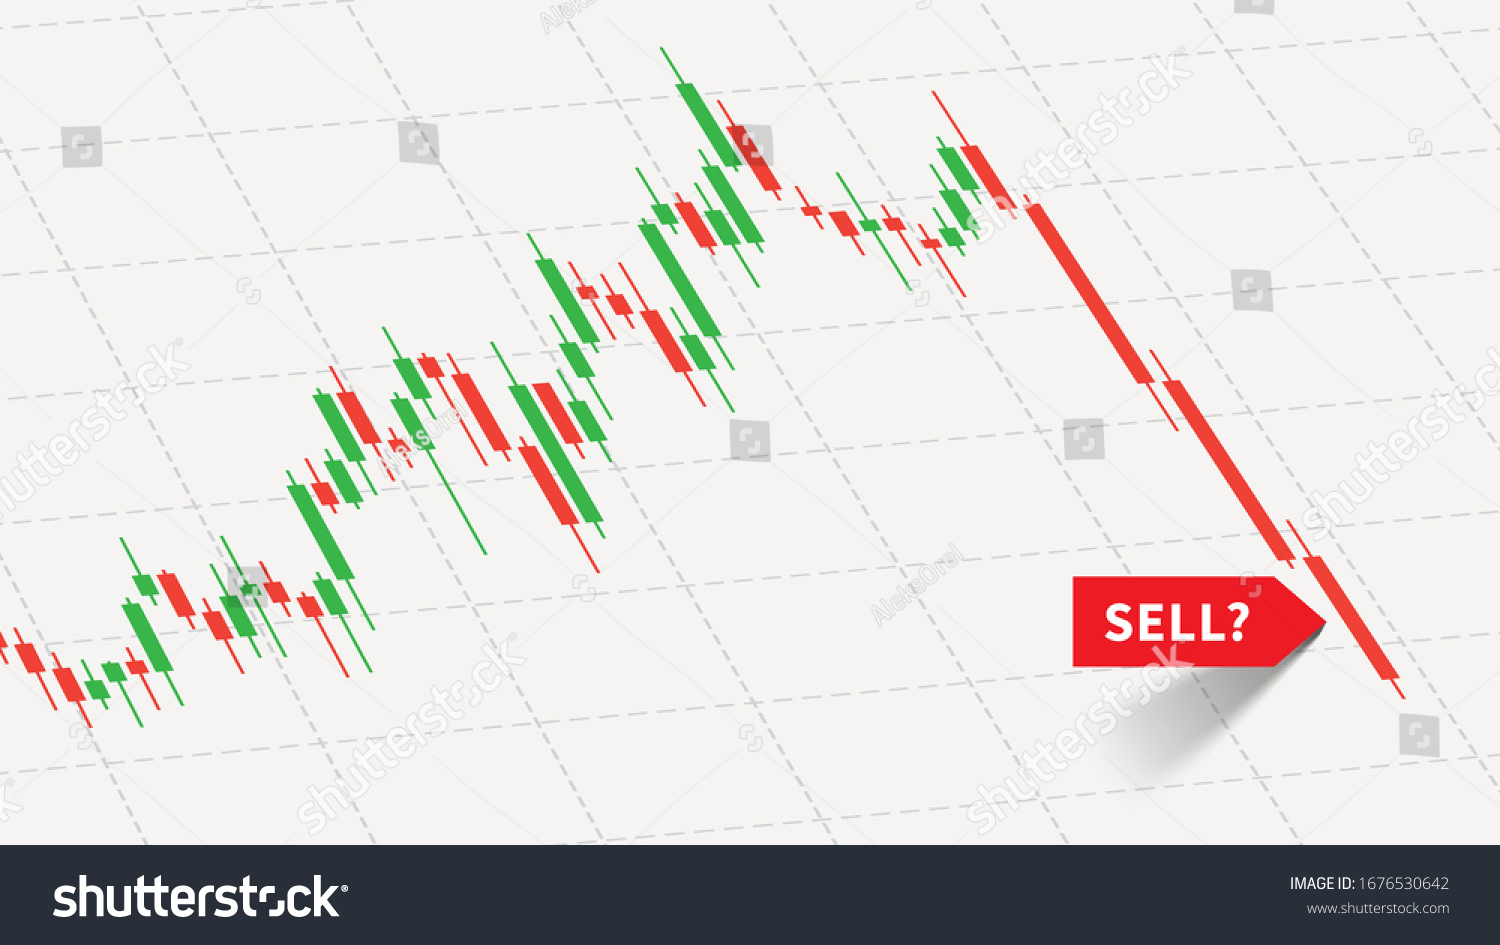 SVG of Stock market decline with sell signal vector illustration. Stock market quotes decline concept. Graph illustrating the collapse of the financial market.
 svg